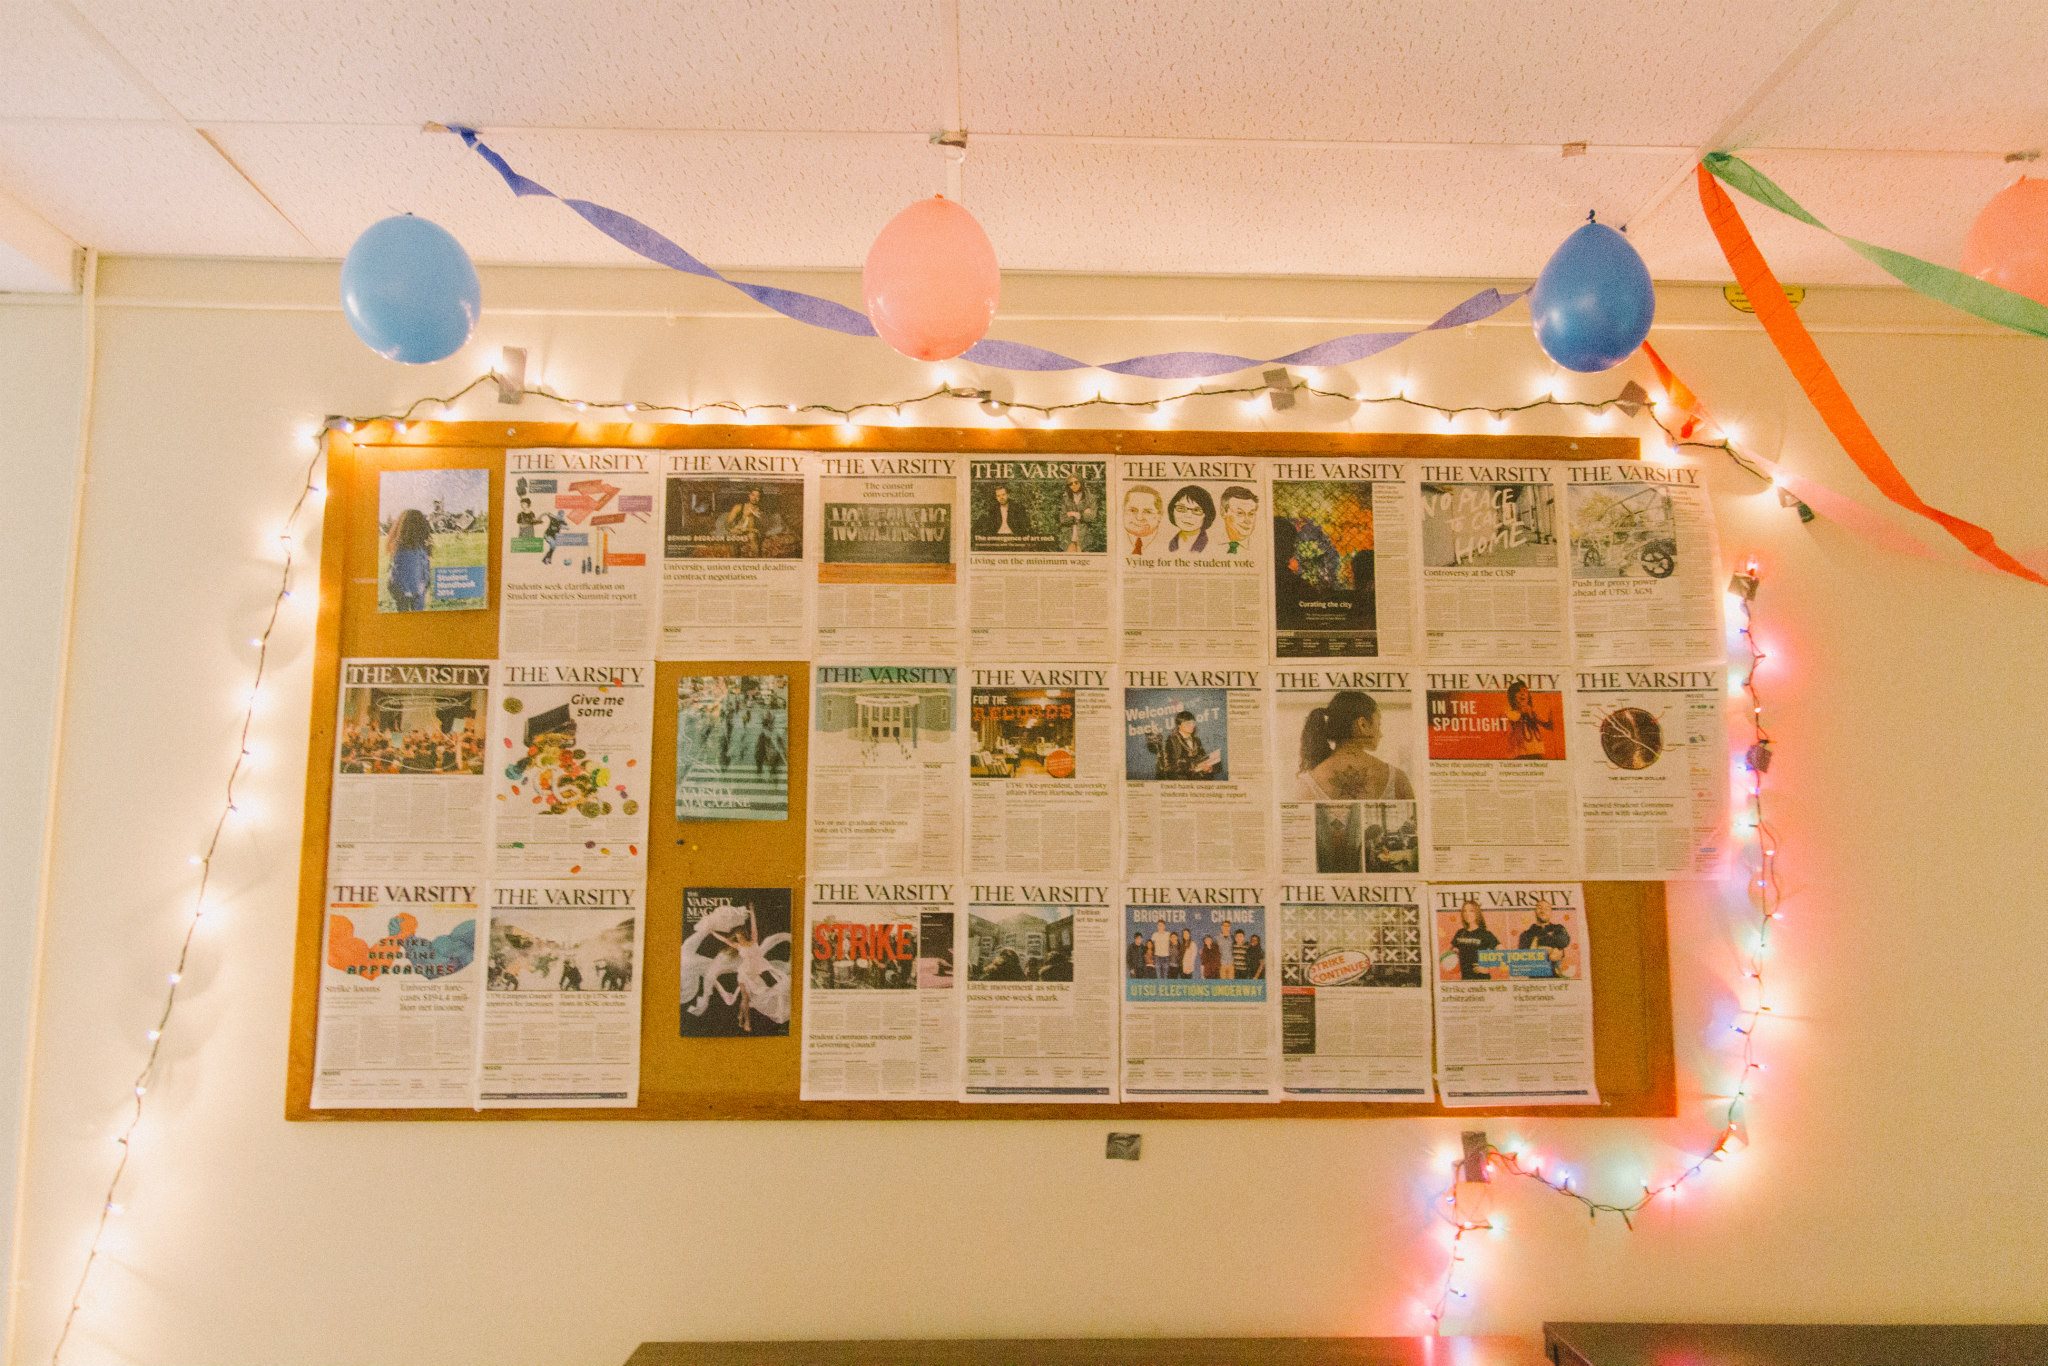 A bulletin board with all the issues from the 2015/2016 volume of The Varsity pinned to it.